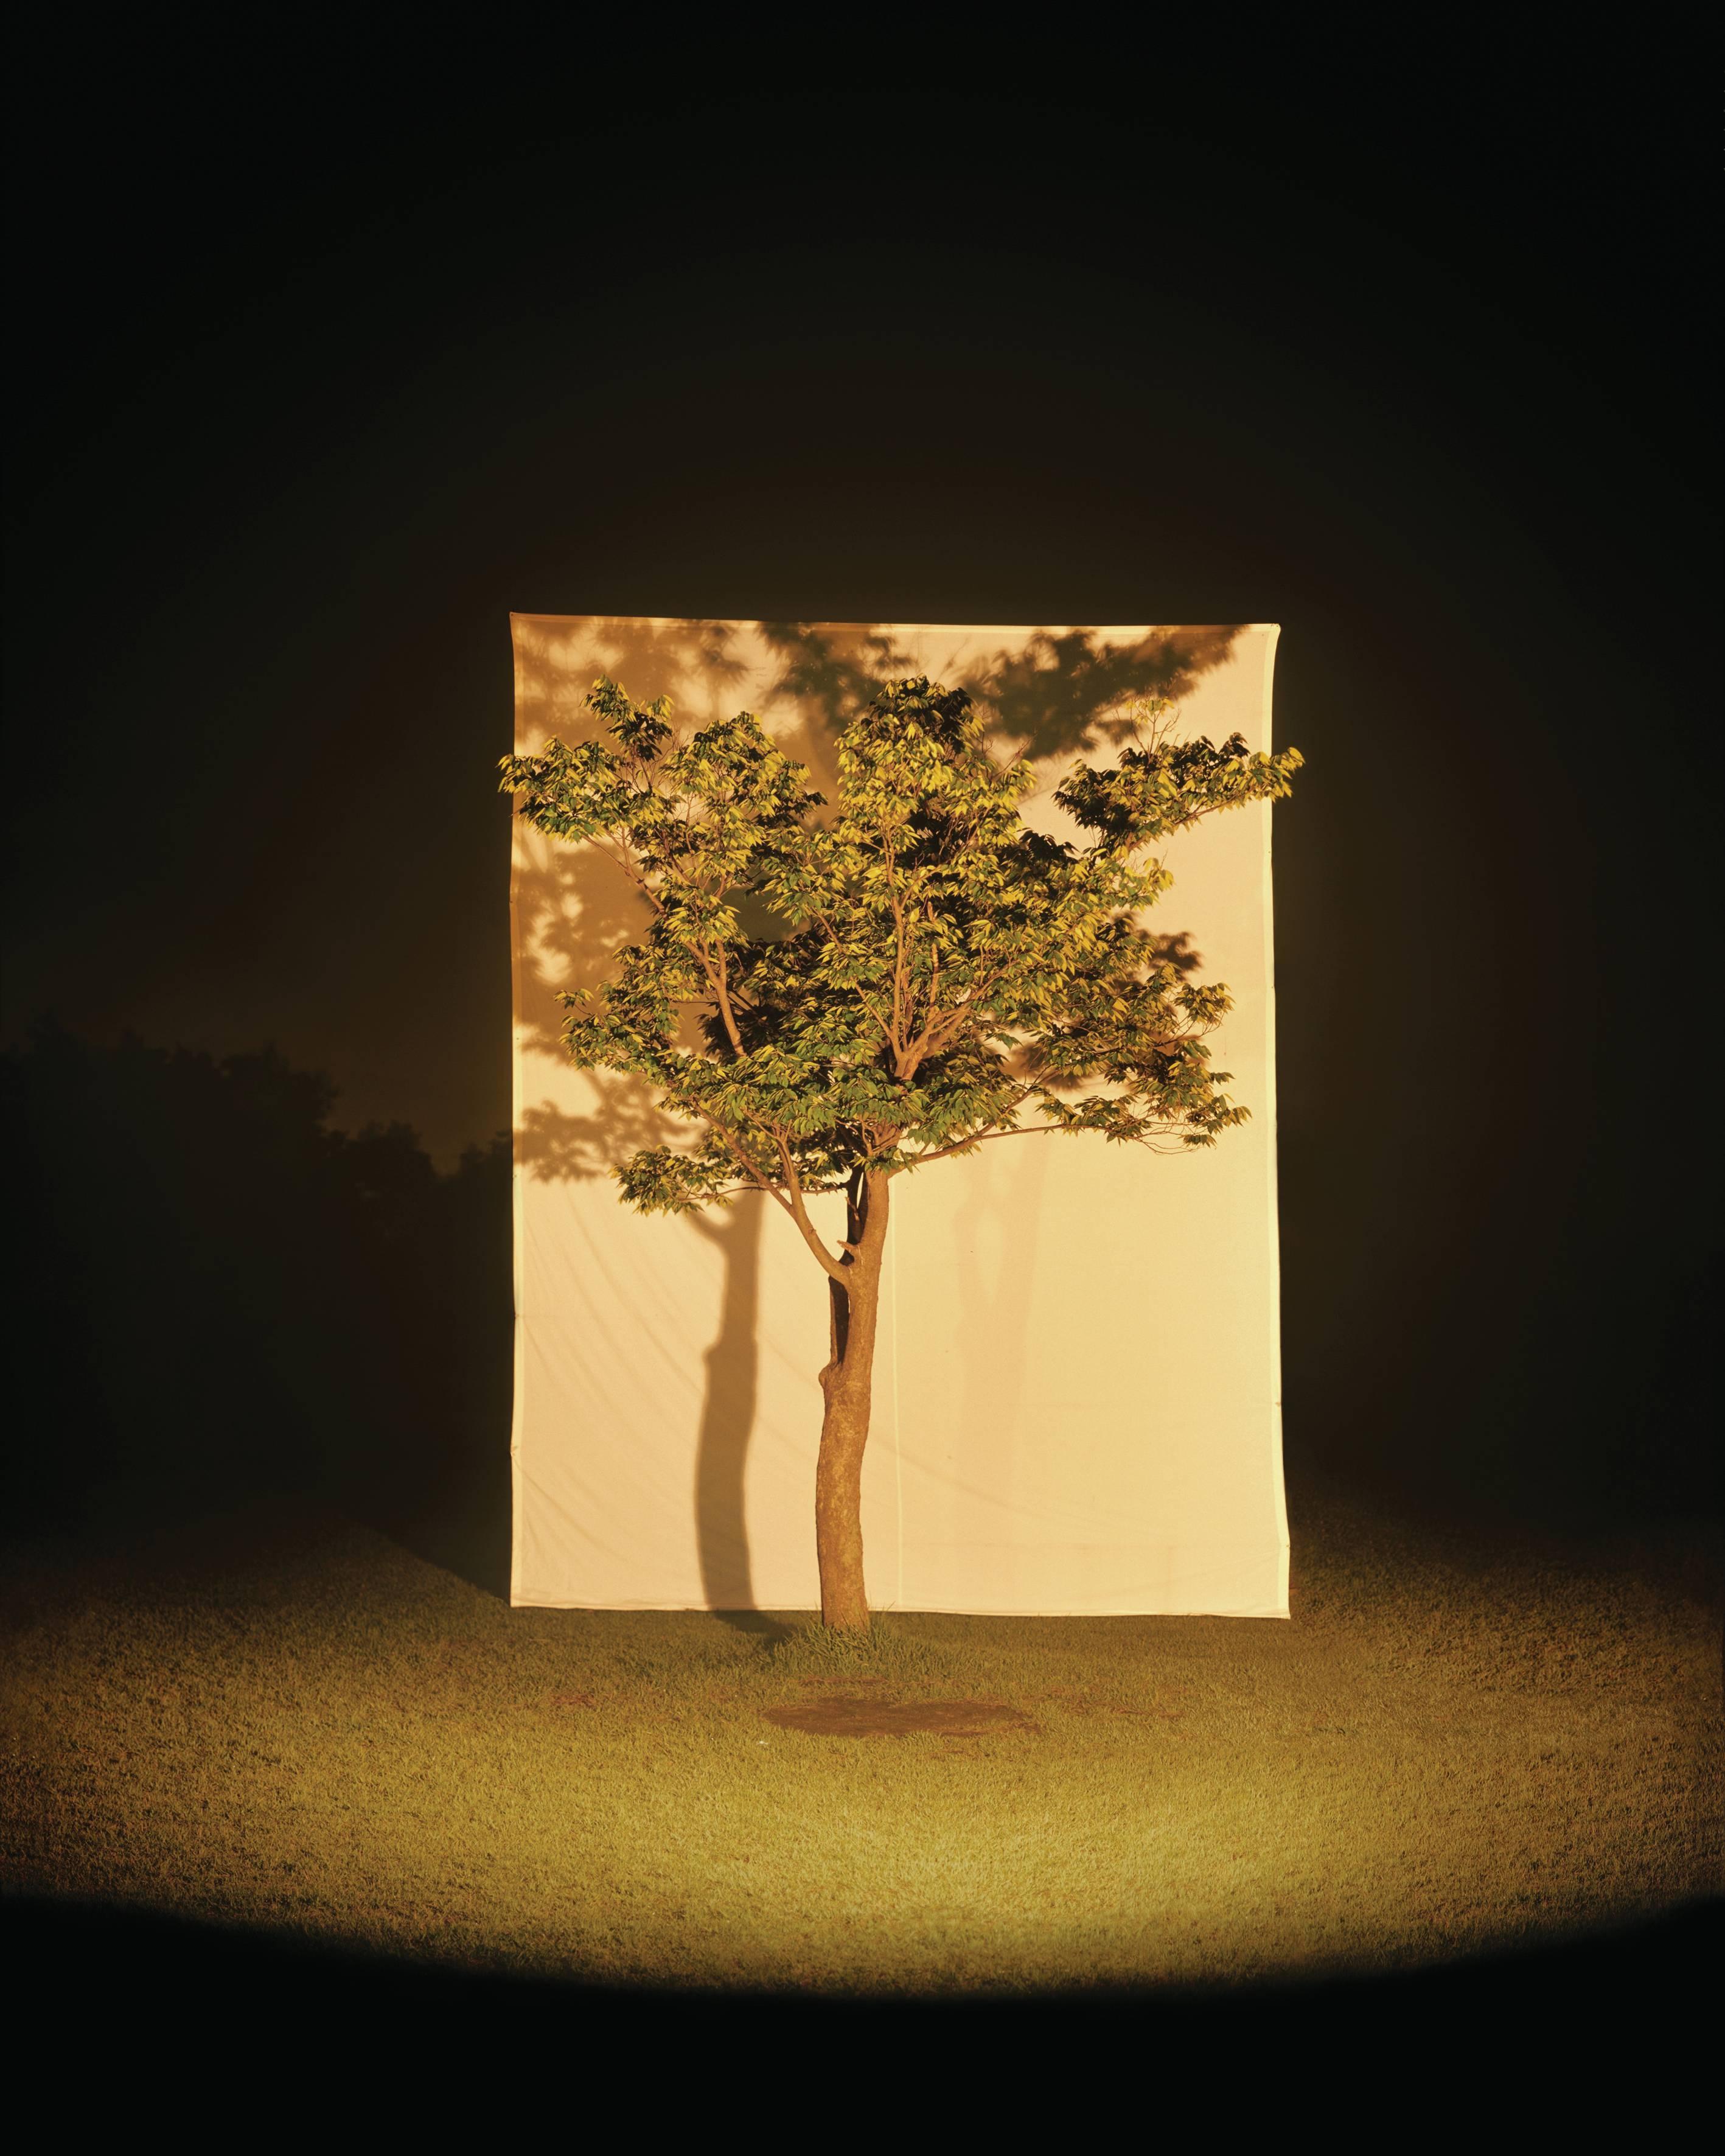 Tree #4 - Photograph by Myoung Ho Lee